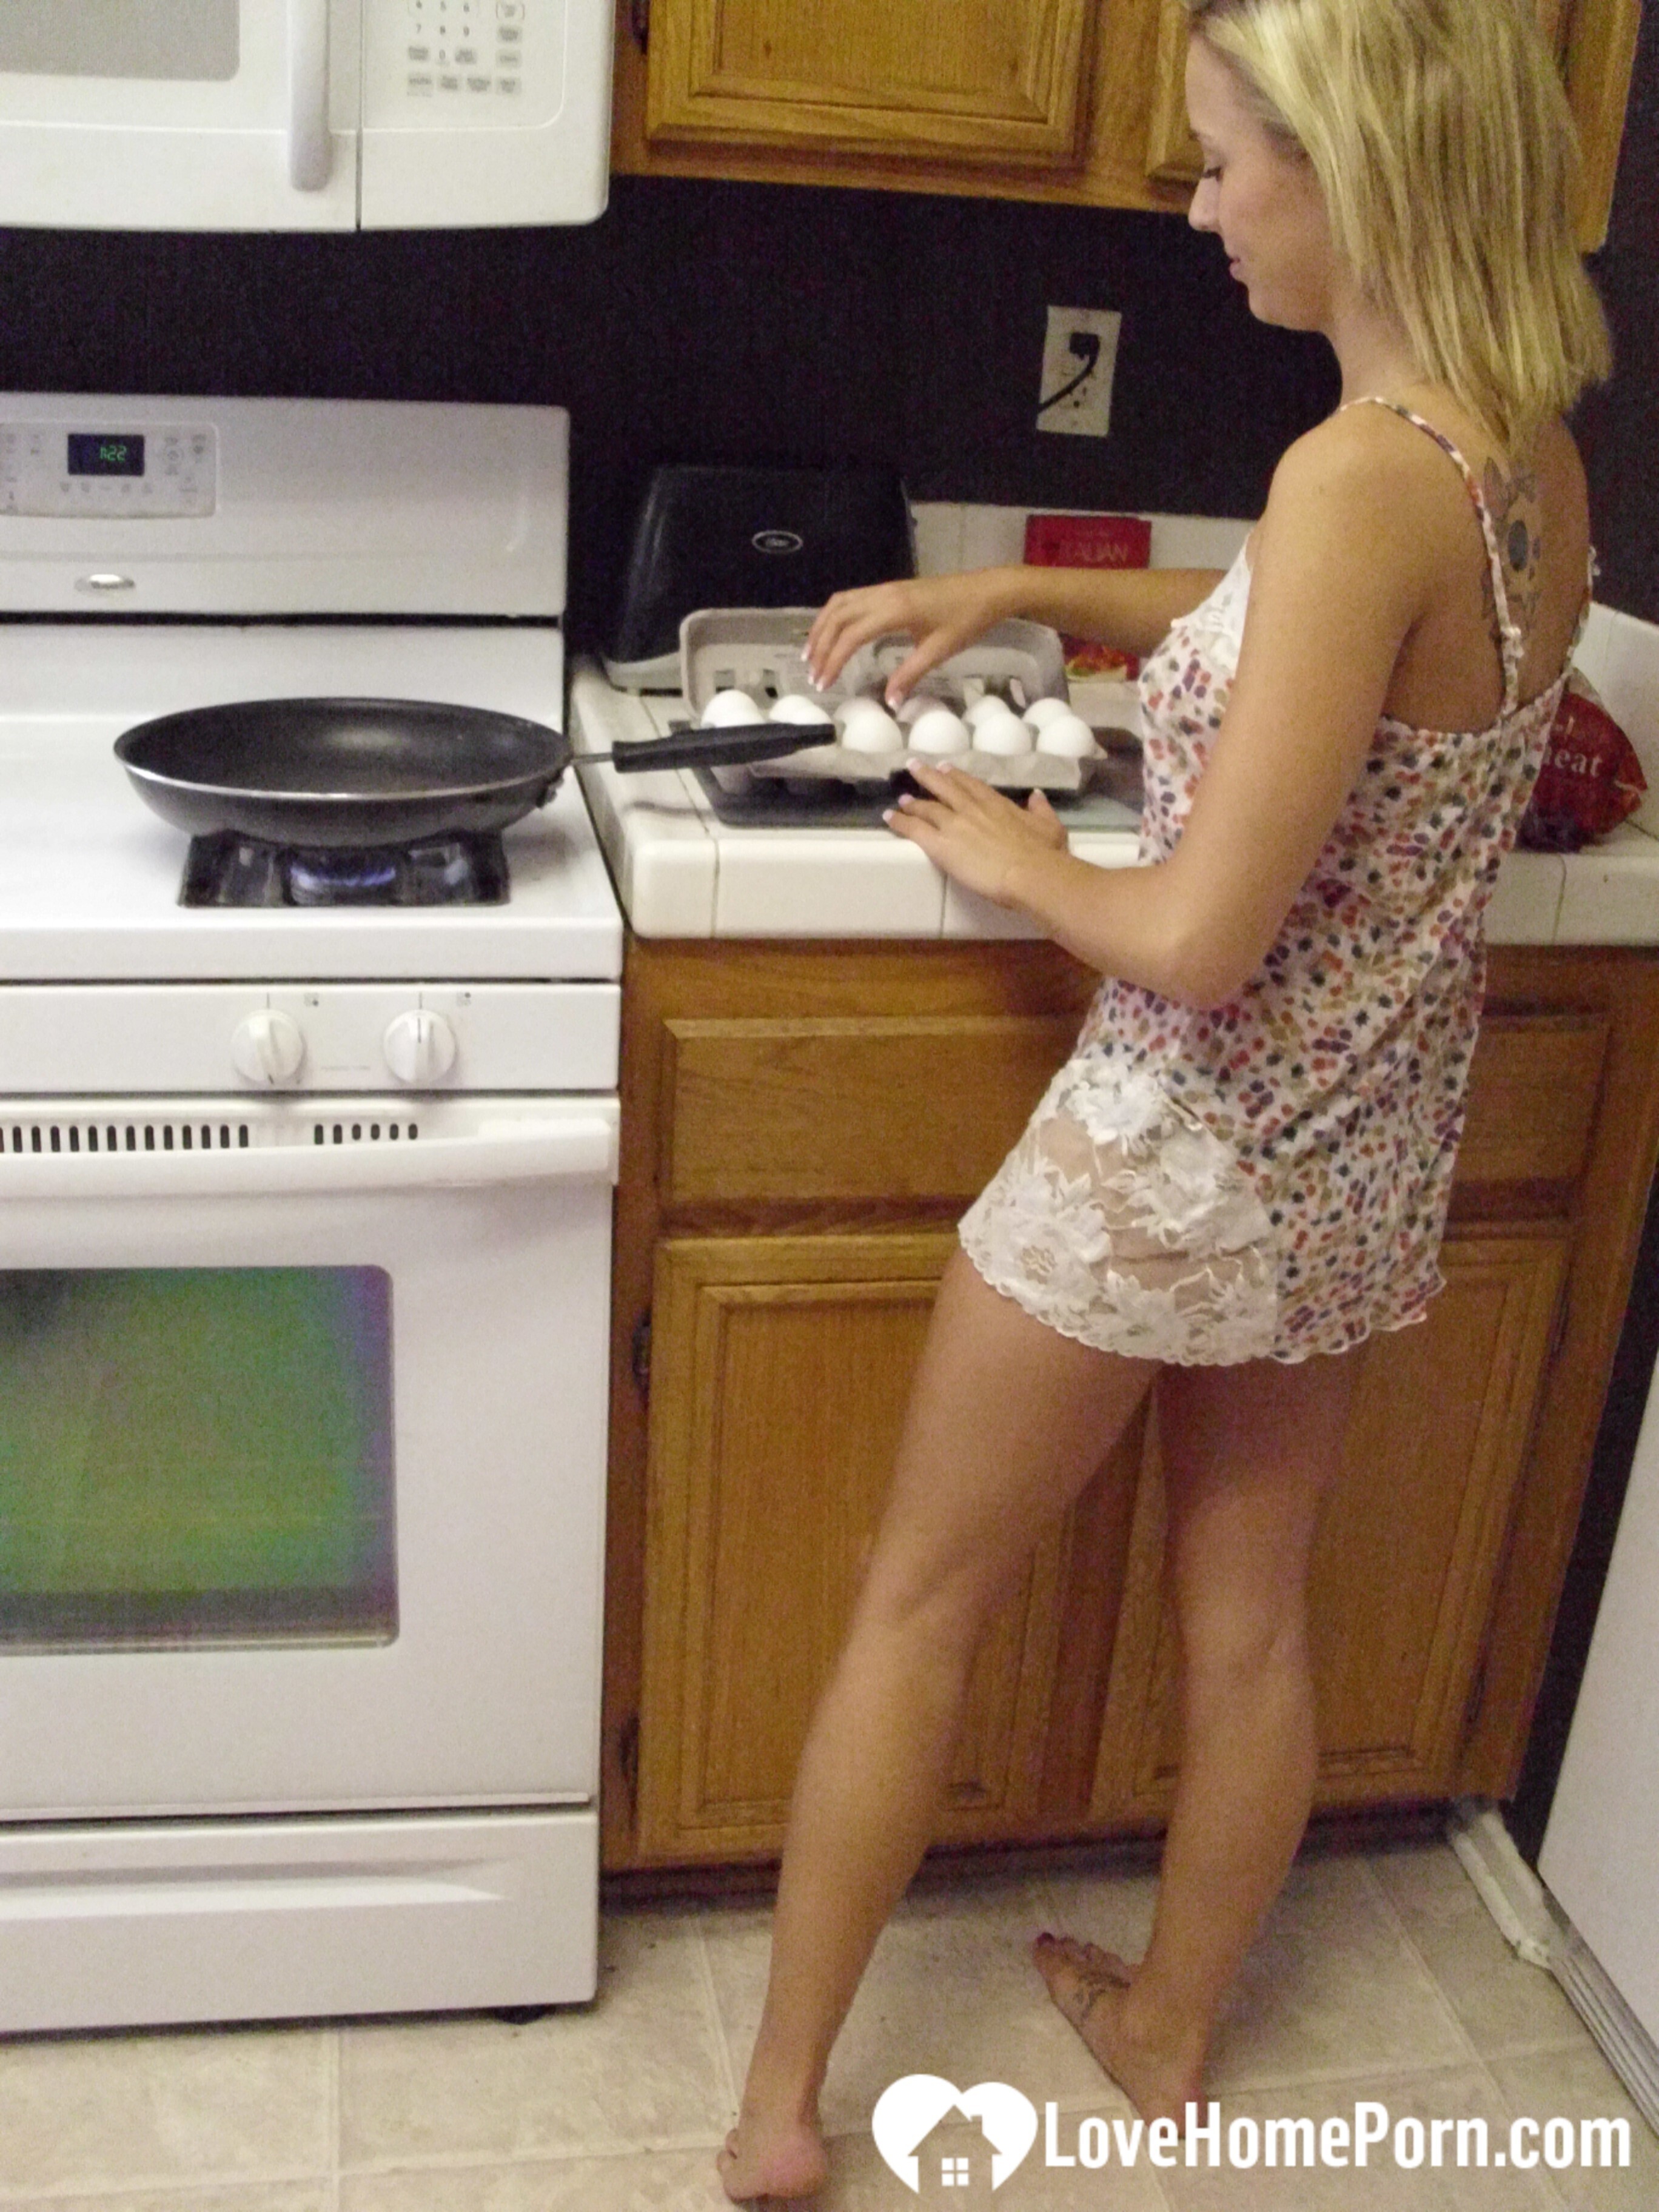 My wife really enjoys cooking while naked porn pictures